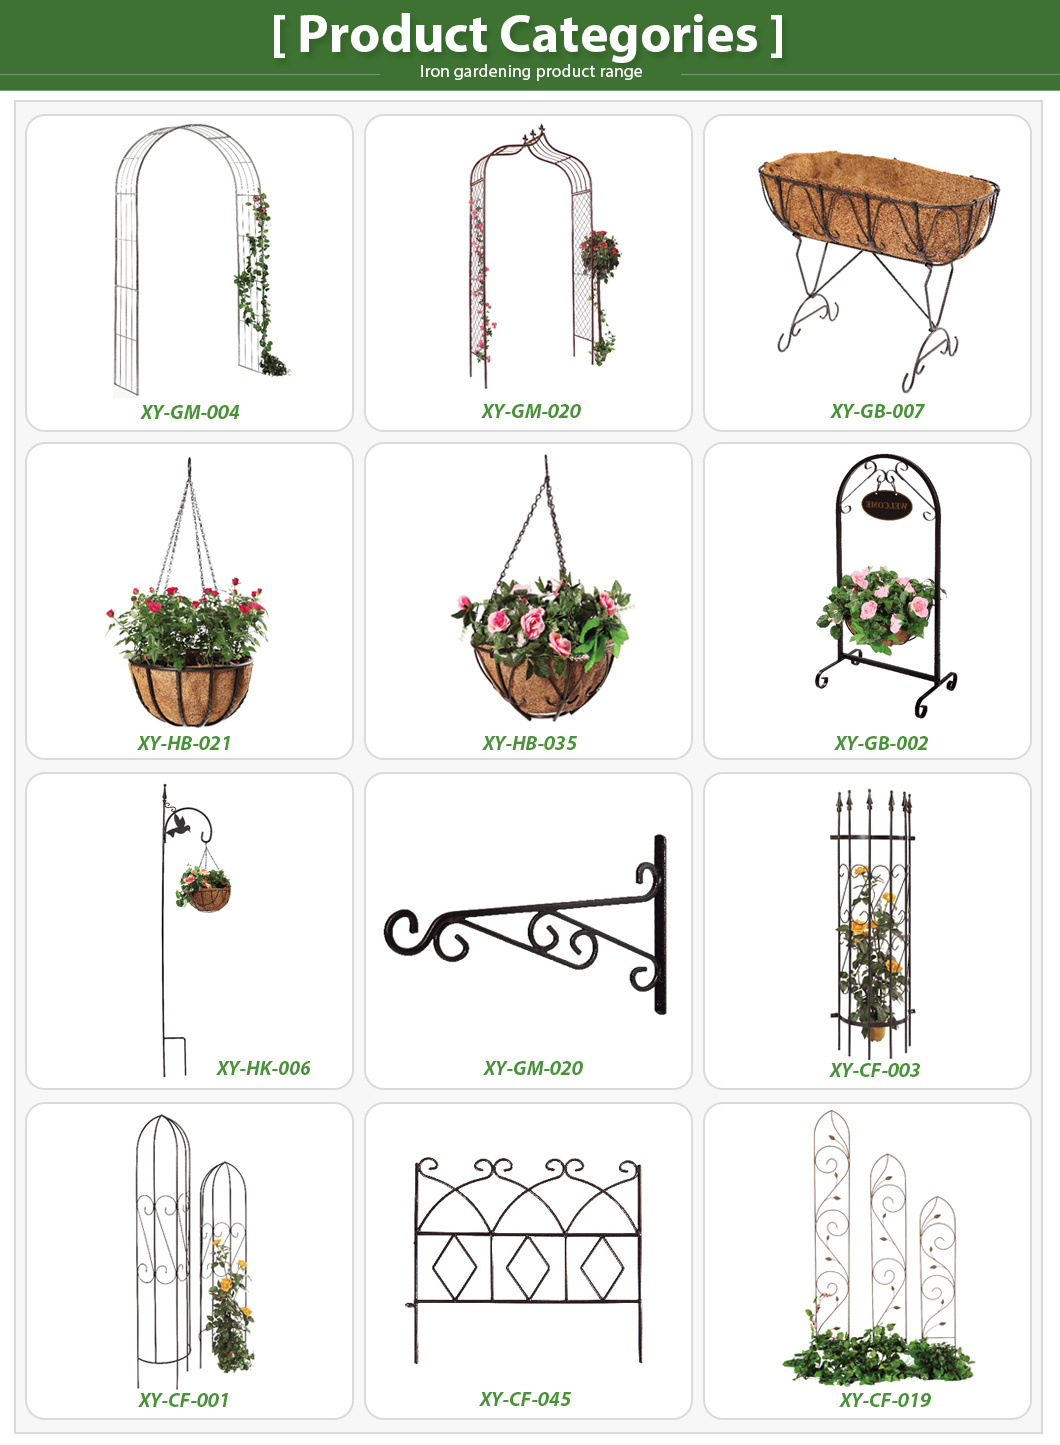 Twisted Iron Wire Hanging Basket for Flower Planting with Coco Liner and Chain (4 sizes)